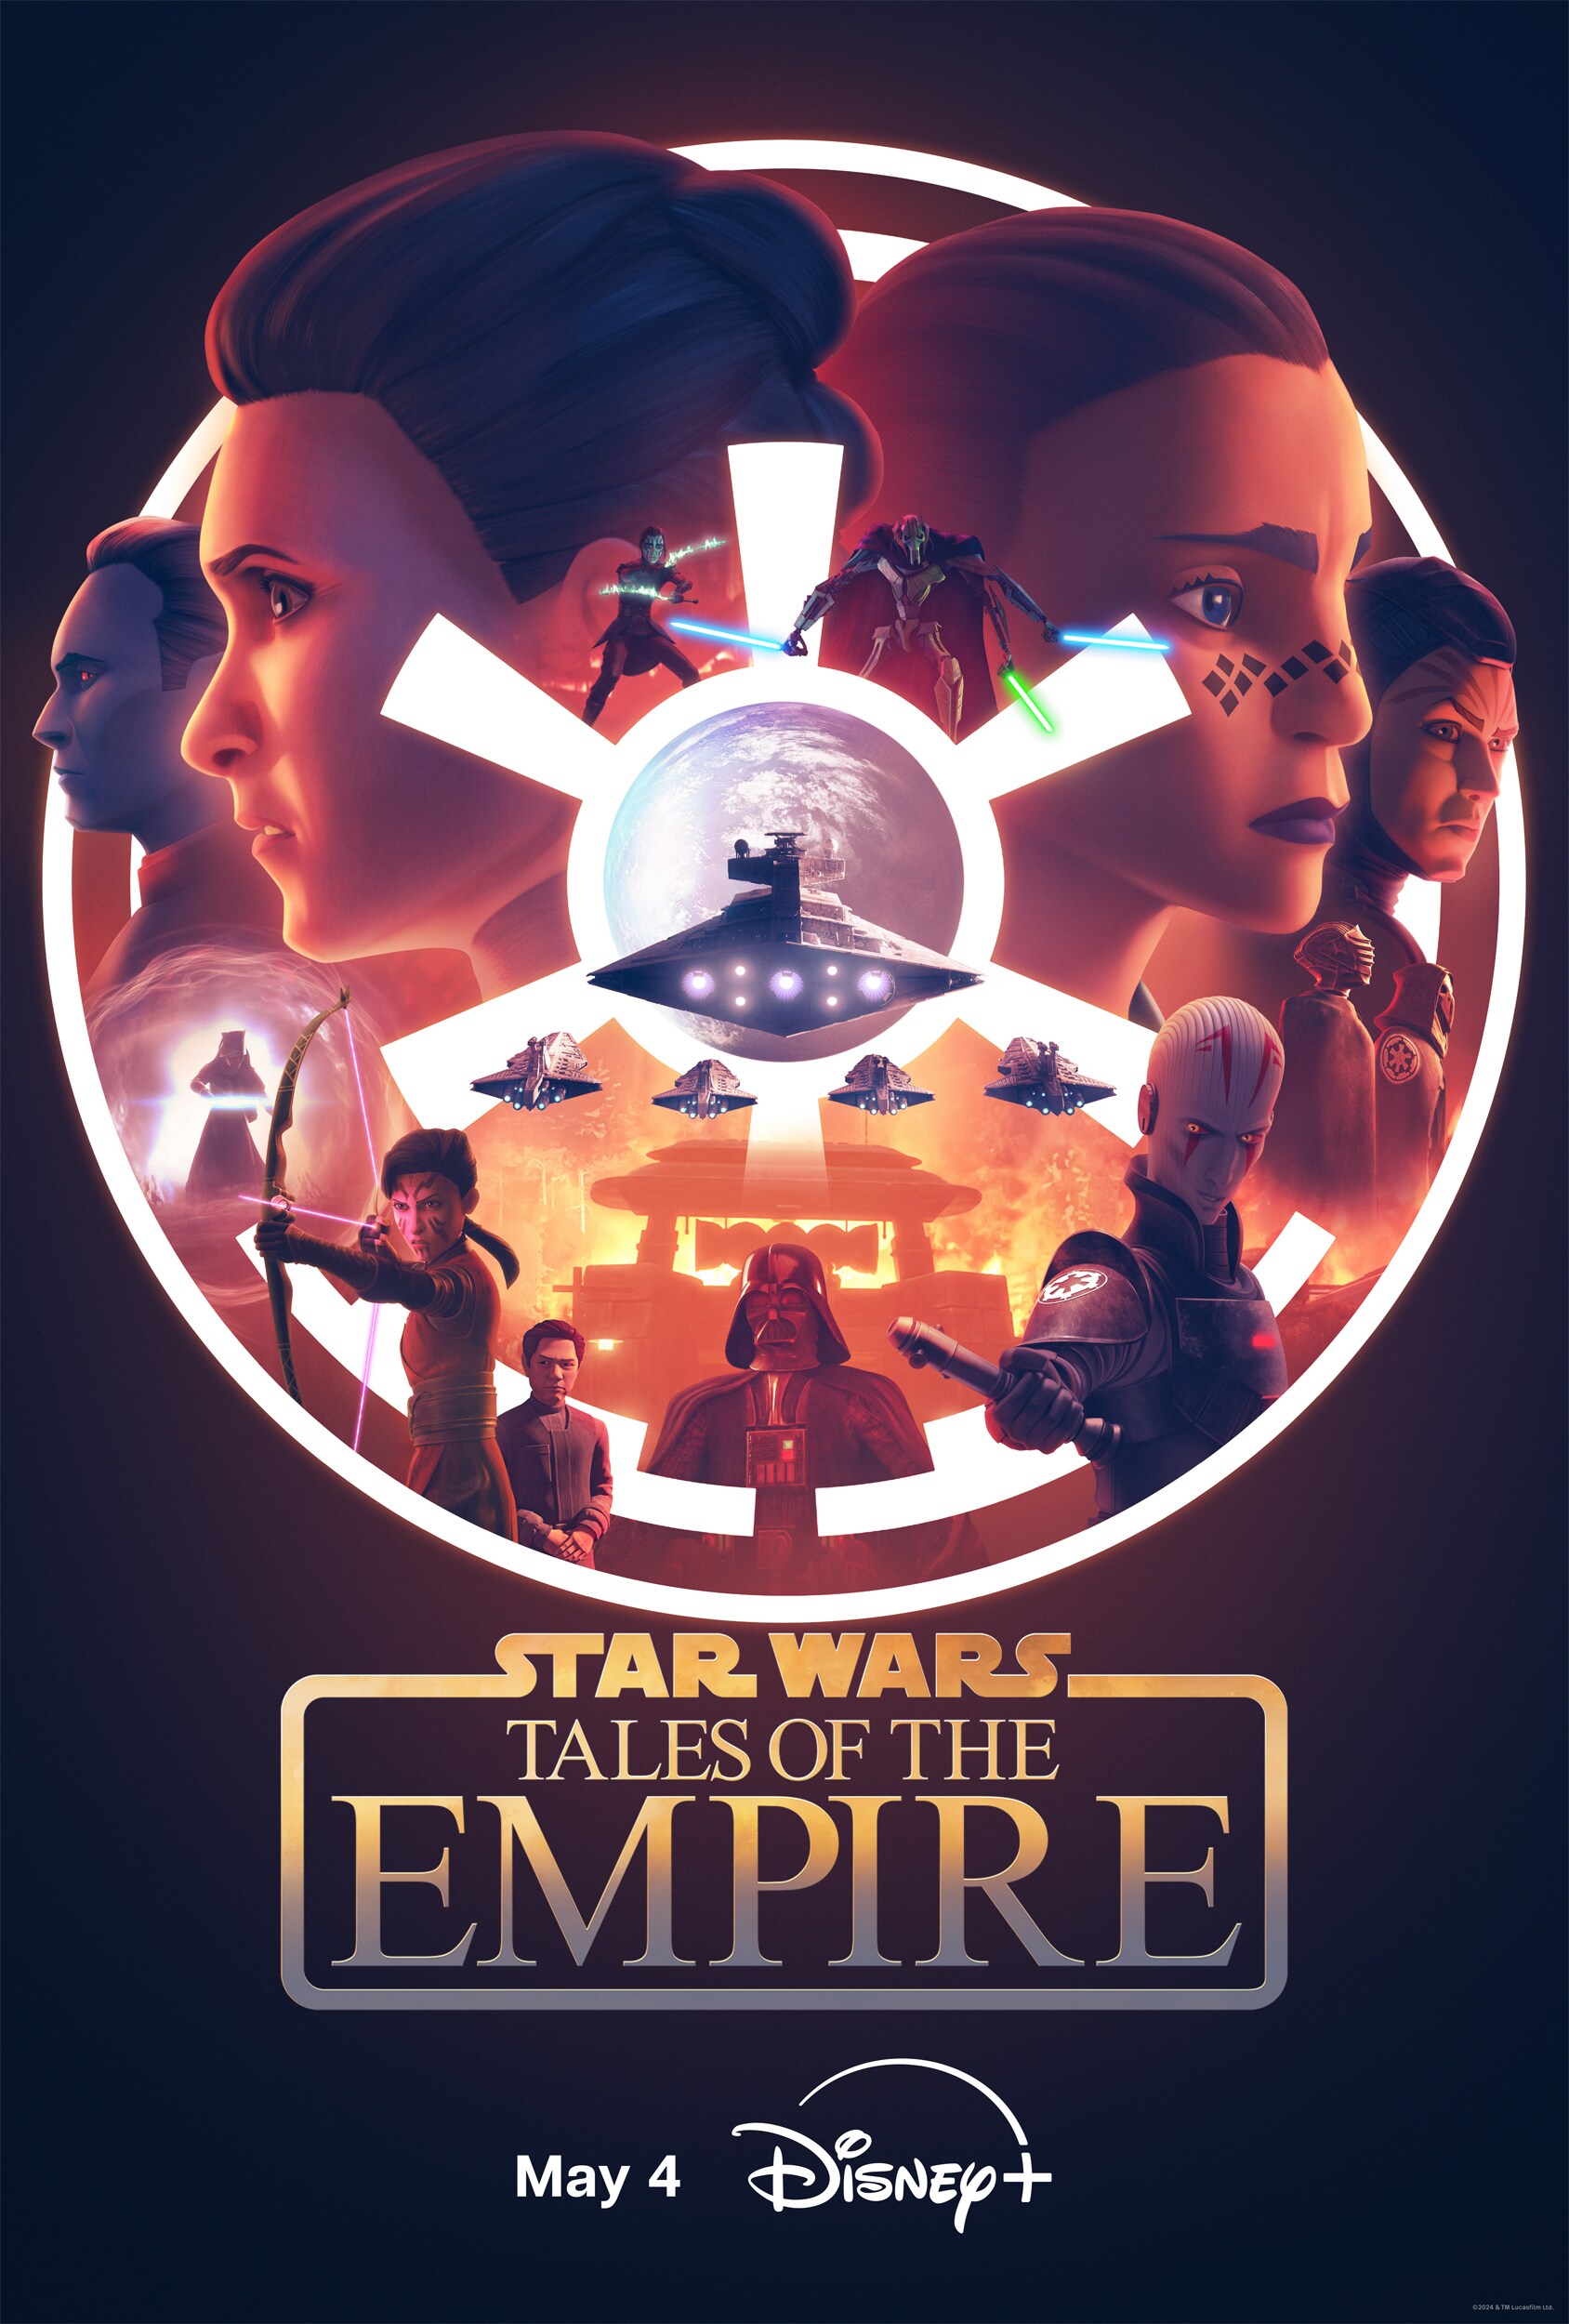 Star Wars: Tales of the Empire Trailer Revealed | StarWars.com